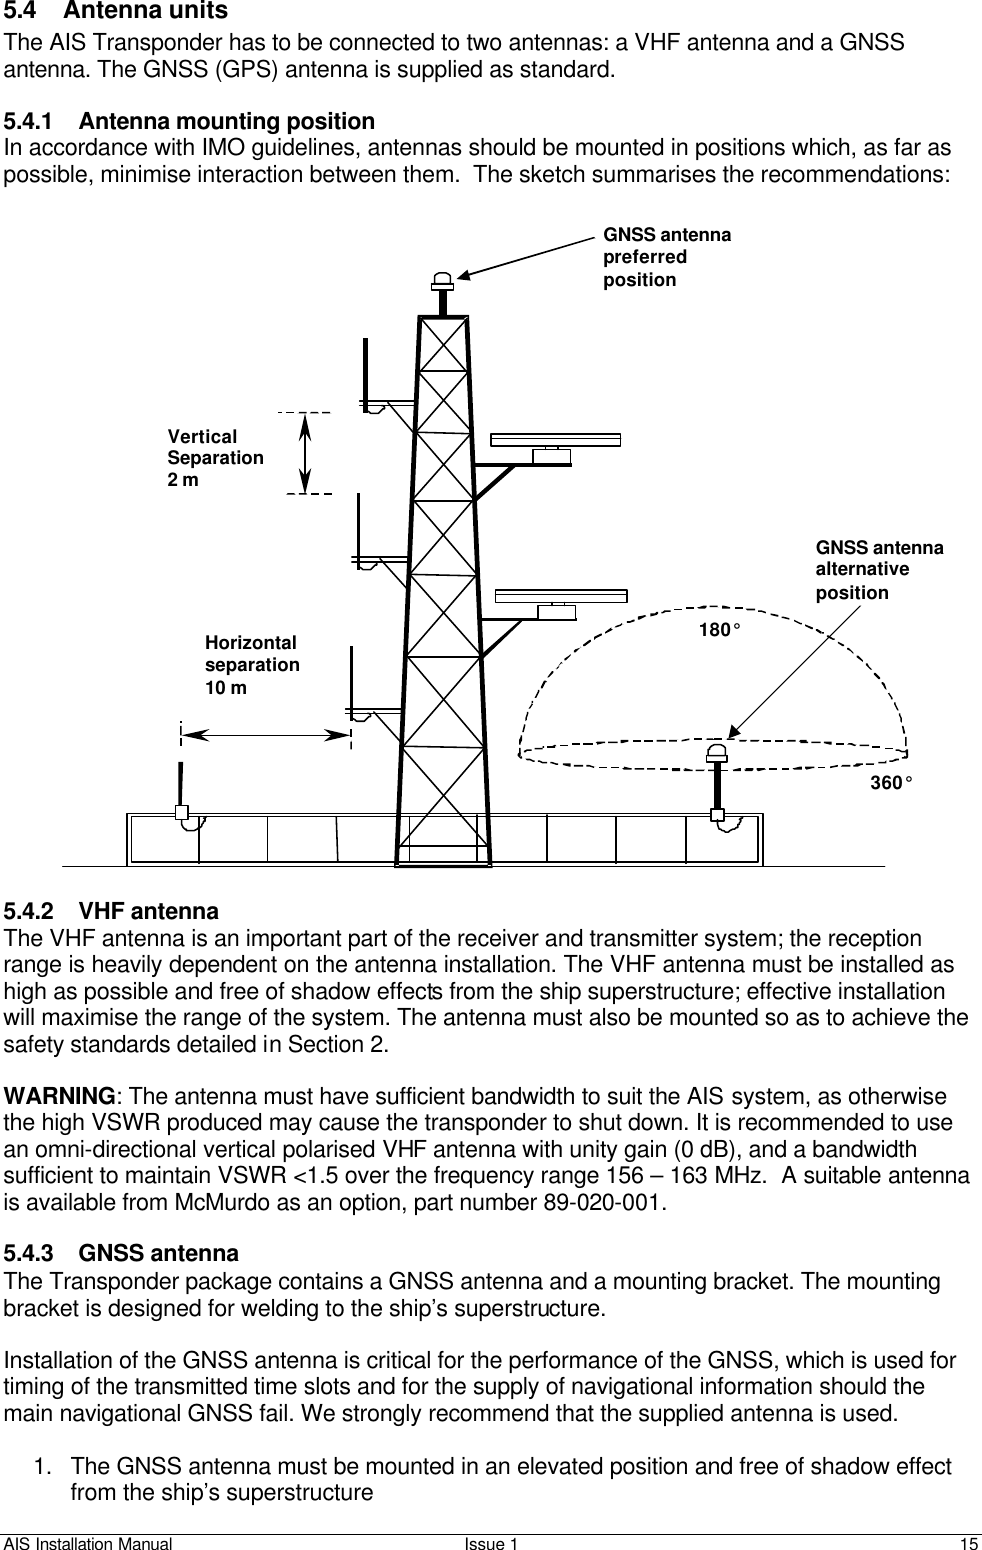 AIS Installation Manual Issue 1 15     5.4 Antenna units The AIS Transponder has to be connected to two antennas: a VHF antenna and a GNSS antenna. The GNSS (GPS) antenna is supplied as standard.  5.4.1 Antenna mounting position In accordance with IMO guidelines, antennas should be mounted in positions which, as far as possible, minimise interaction between them.  The sketch summarises the recommendations:                            5.4.2 VHF antenna The VHF antenna is an important part of the receiver and transmitter system; the reception range is heavily dependent on the antenna installation. The VHF antenna must be installed as high as possible and free of shadow effects from the ship superstructure; effective installation will maximise the range of the system. The antenna must also be mounted so as to achieve the safety standards detailed in Section 2.  WARNING: The antenna must have sufficient bandwidth to suit the AIS system, as otherwise the high VSWR produced may cause the transponder to shut down. It is recommended to use an omni-directional vertical polarised VHF antenna with unity gain (0 dB), and a bandwidth sufficient to maintain VSWR &lt;1.5 over the frequency range 156 – 163 MHz.  A suitable antenna is available from McMurdo as an option, part number 89-020-001.  5.4.3 GNSS antenna The Transponder package contains a GNSS antenna and a mounting bracket. The mounting bracket is designed for welding to the ship’s superstructure.  Installation of the GNSS antenna is critical for the performance of the GNSS, which is used for timing of the transmitted time slots and for the supply of navigational information should the main navigational GNSS fail. We strongly recommend that the supplied antenna is used.  1. The GNSS antenna must be mounted in an elevated position and free of shadow effect from the ship’s superstructure Vertical separation2m GNSS antenna alternative position 180° Horizontal separation 10 m Vertical Separation 2 m 360° GNSS antenna preferred position 